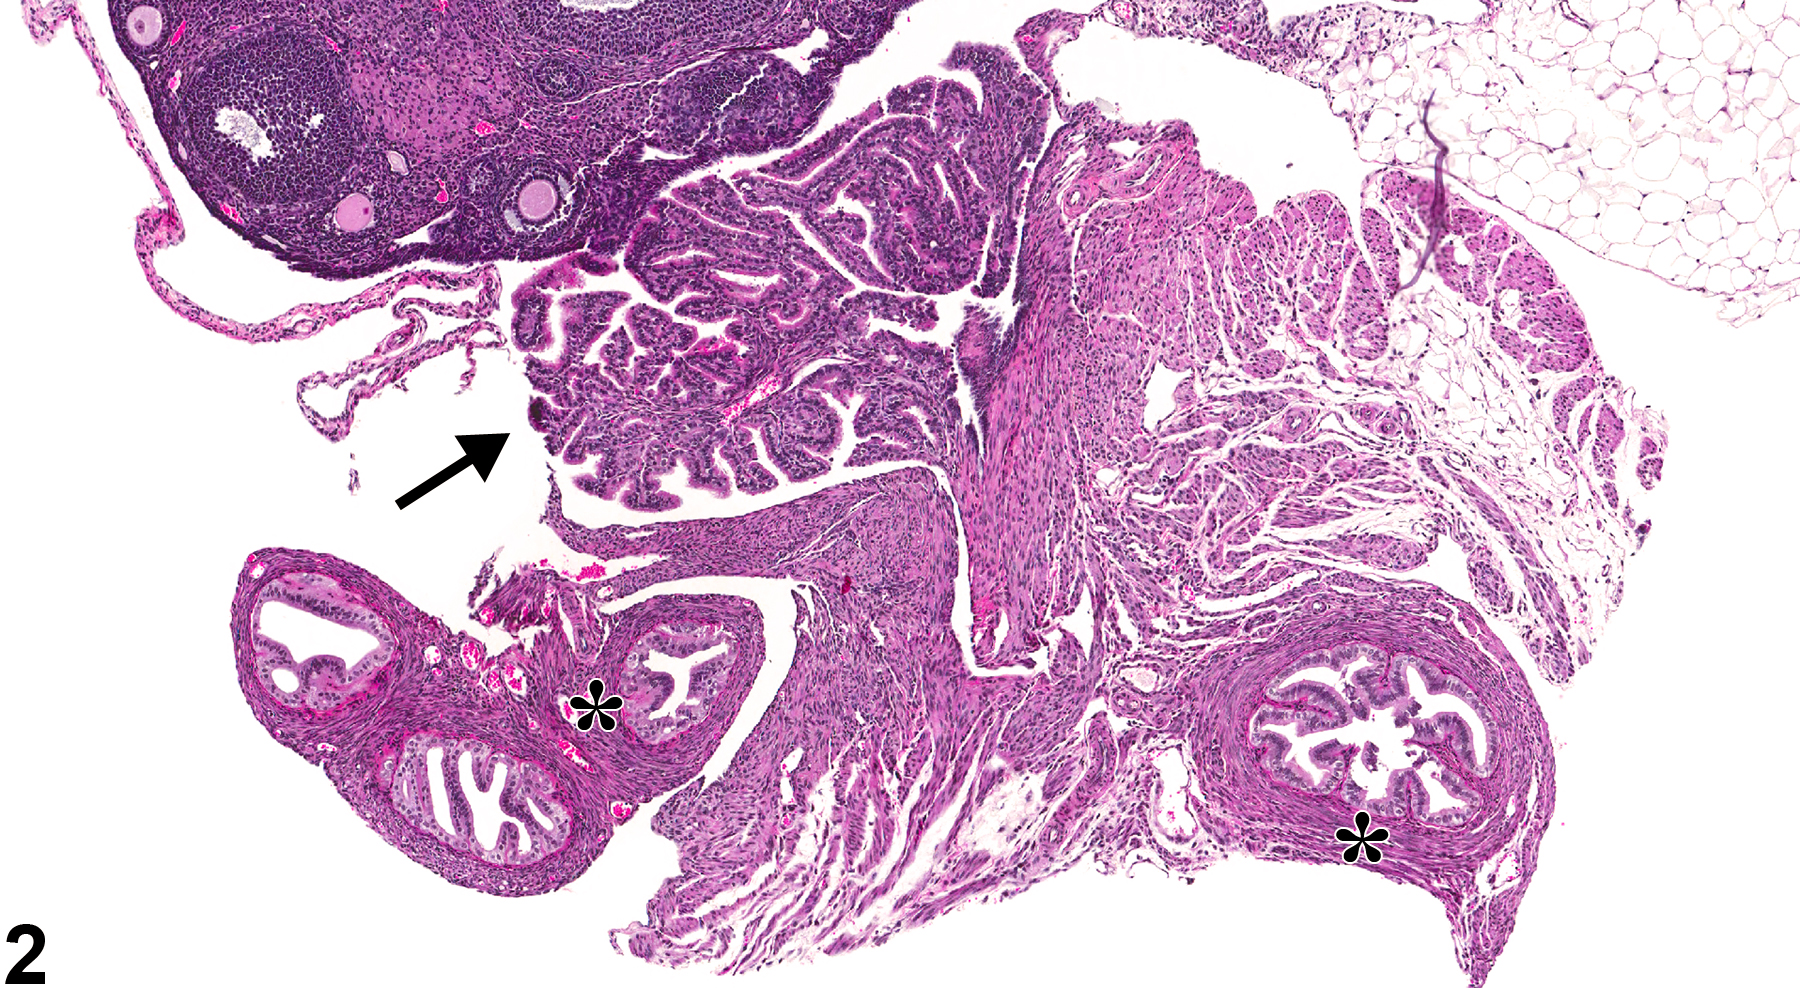 Image of atrophy in the oviduct from a female B6C3F1 mouse in a chronic study